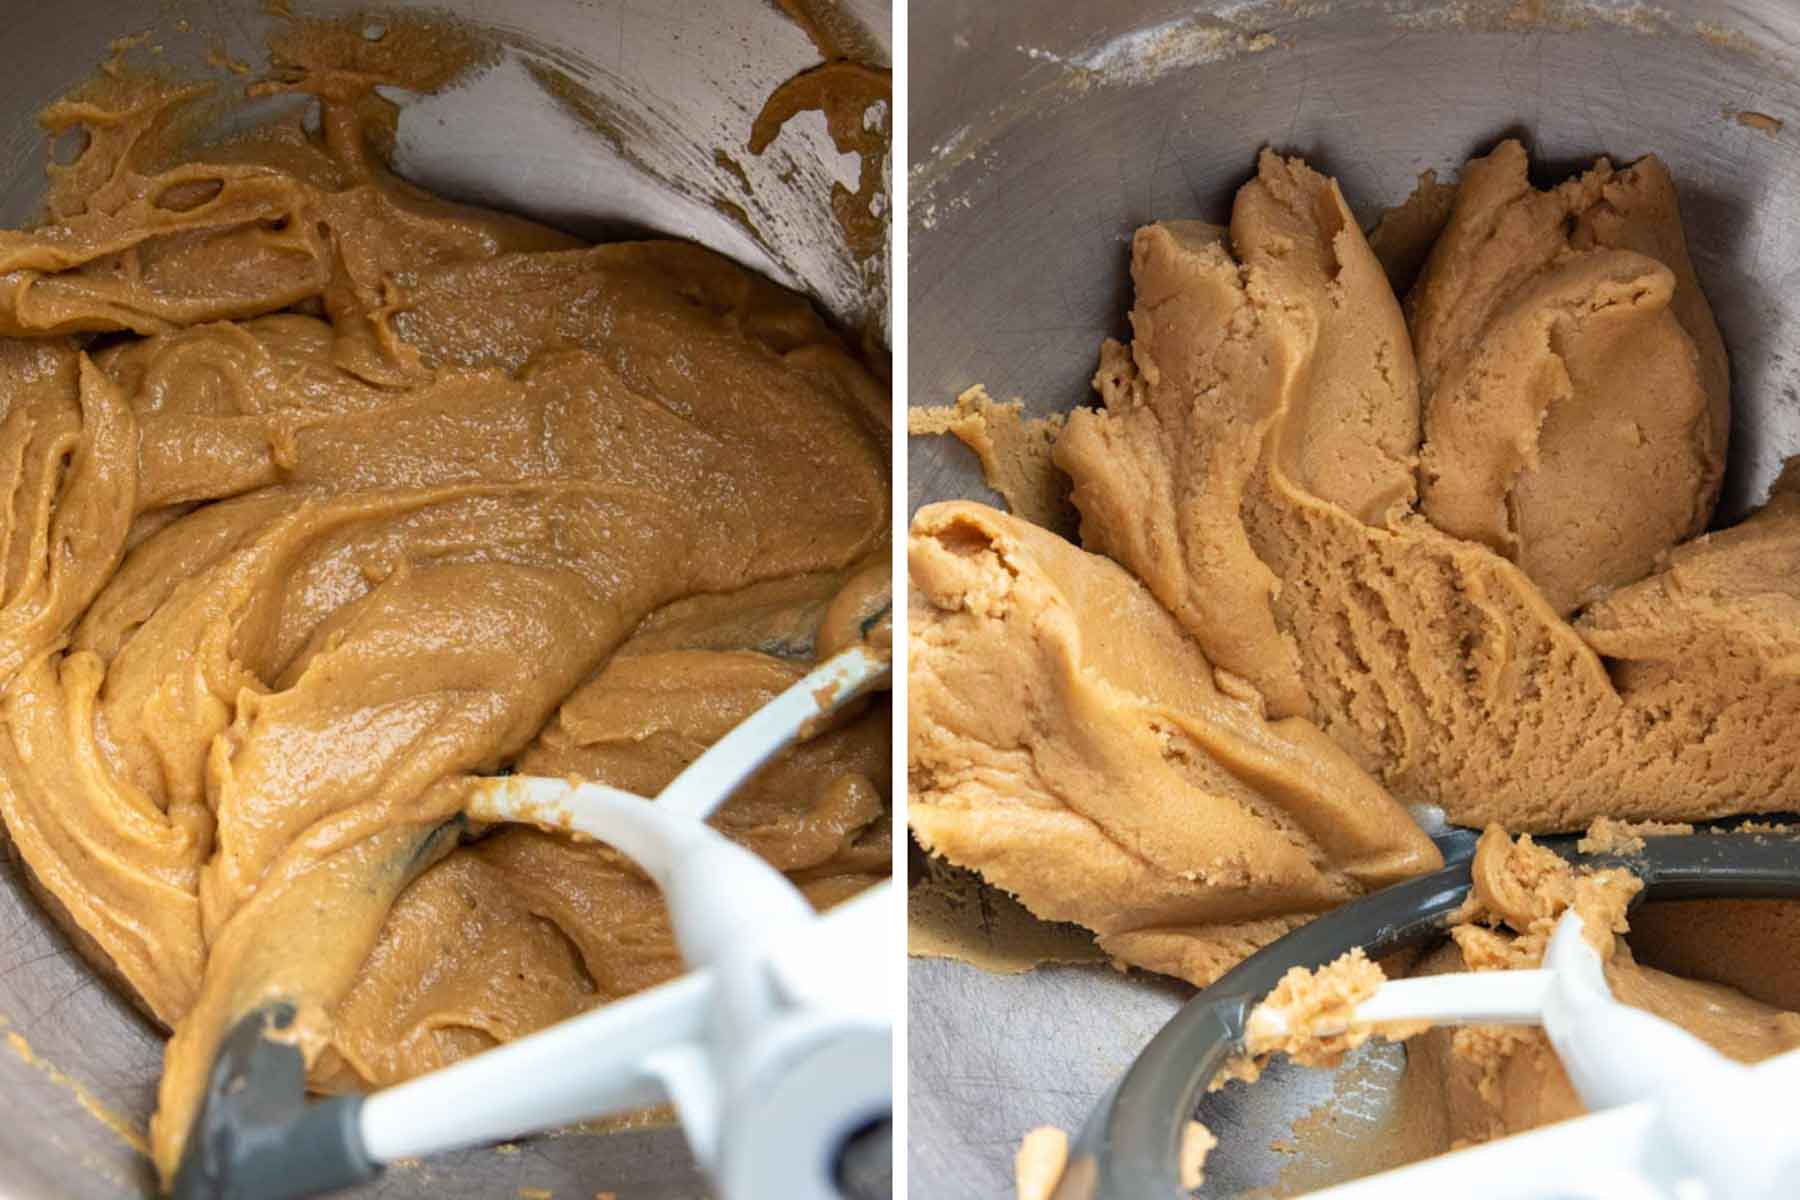 images showing how to make gluten-free peanut butter cookie dough.